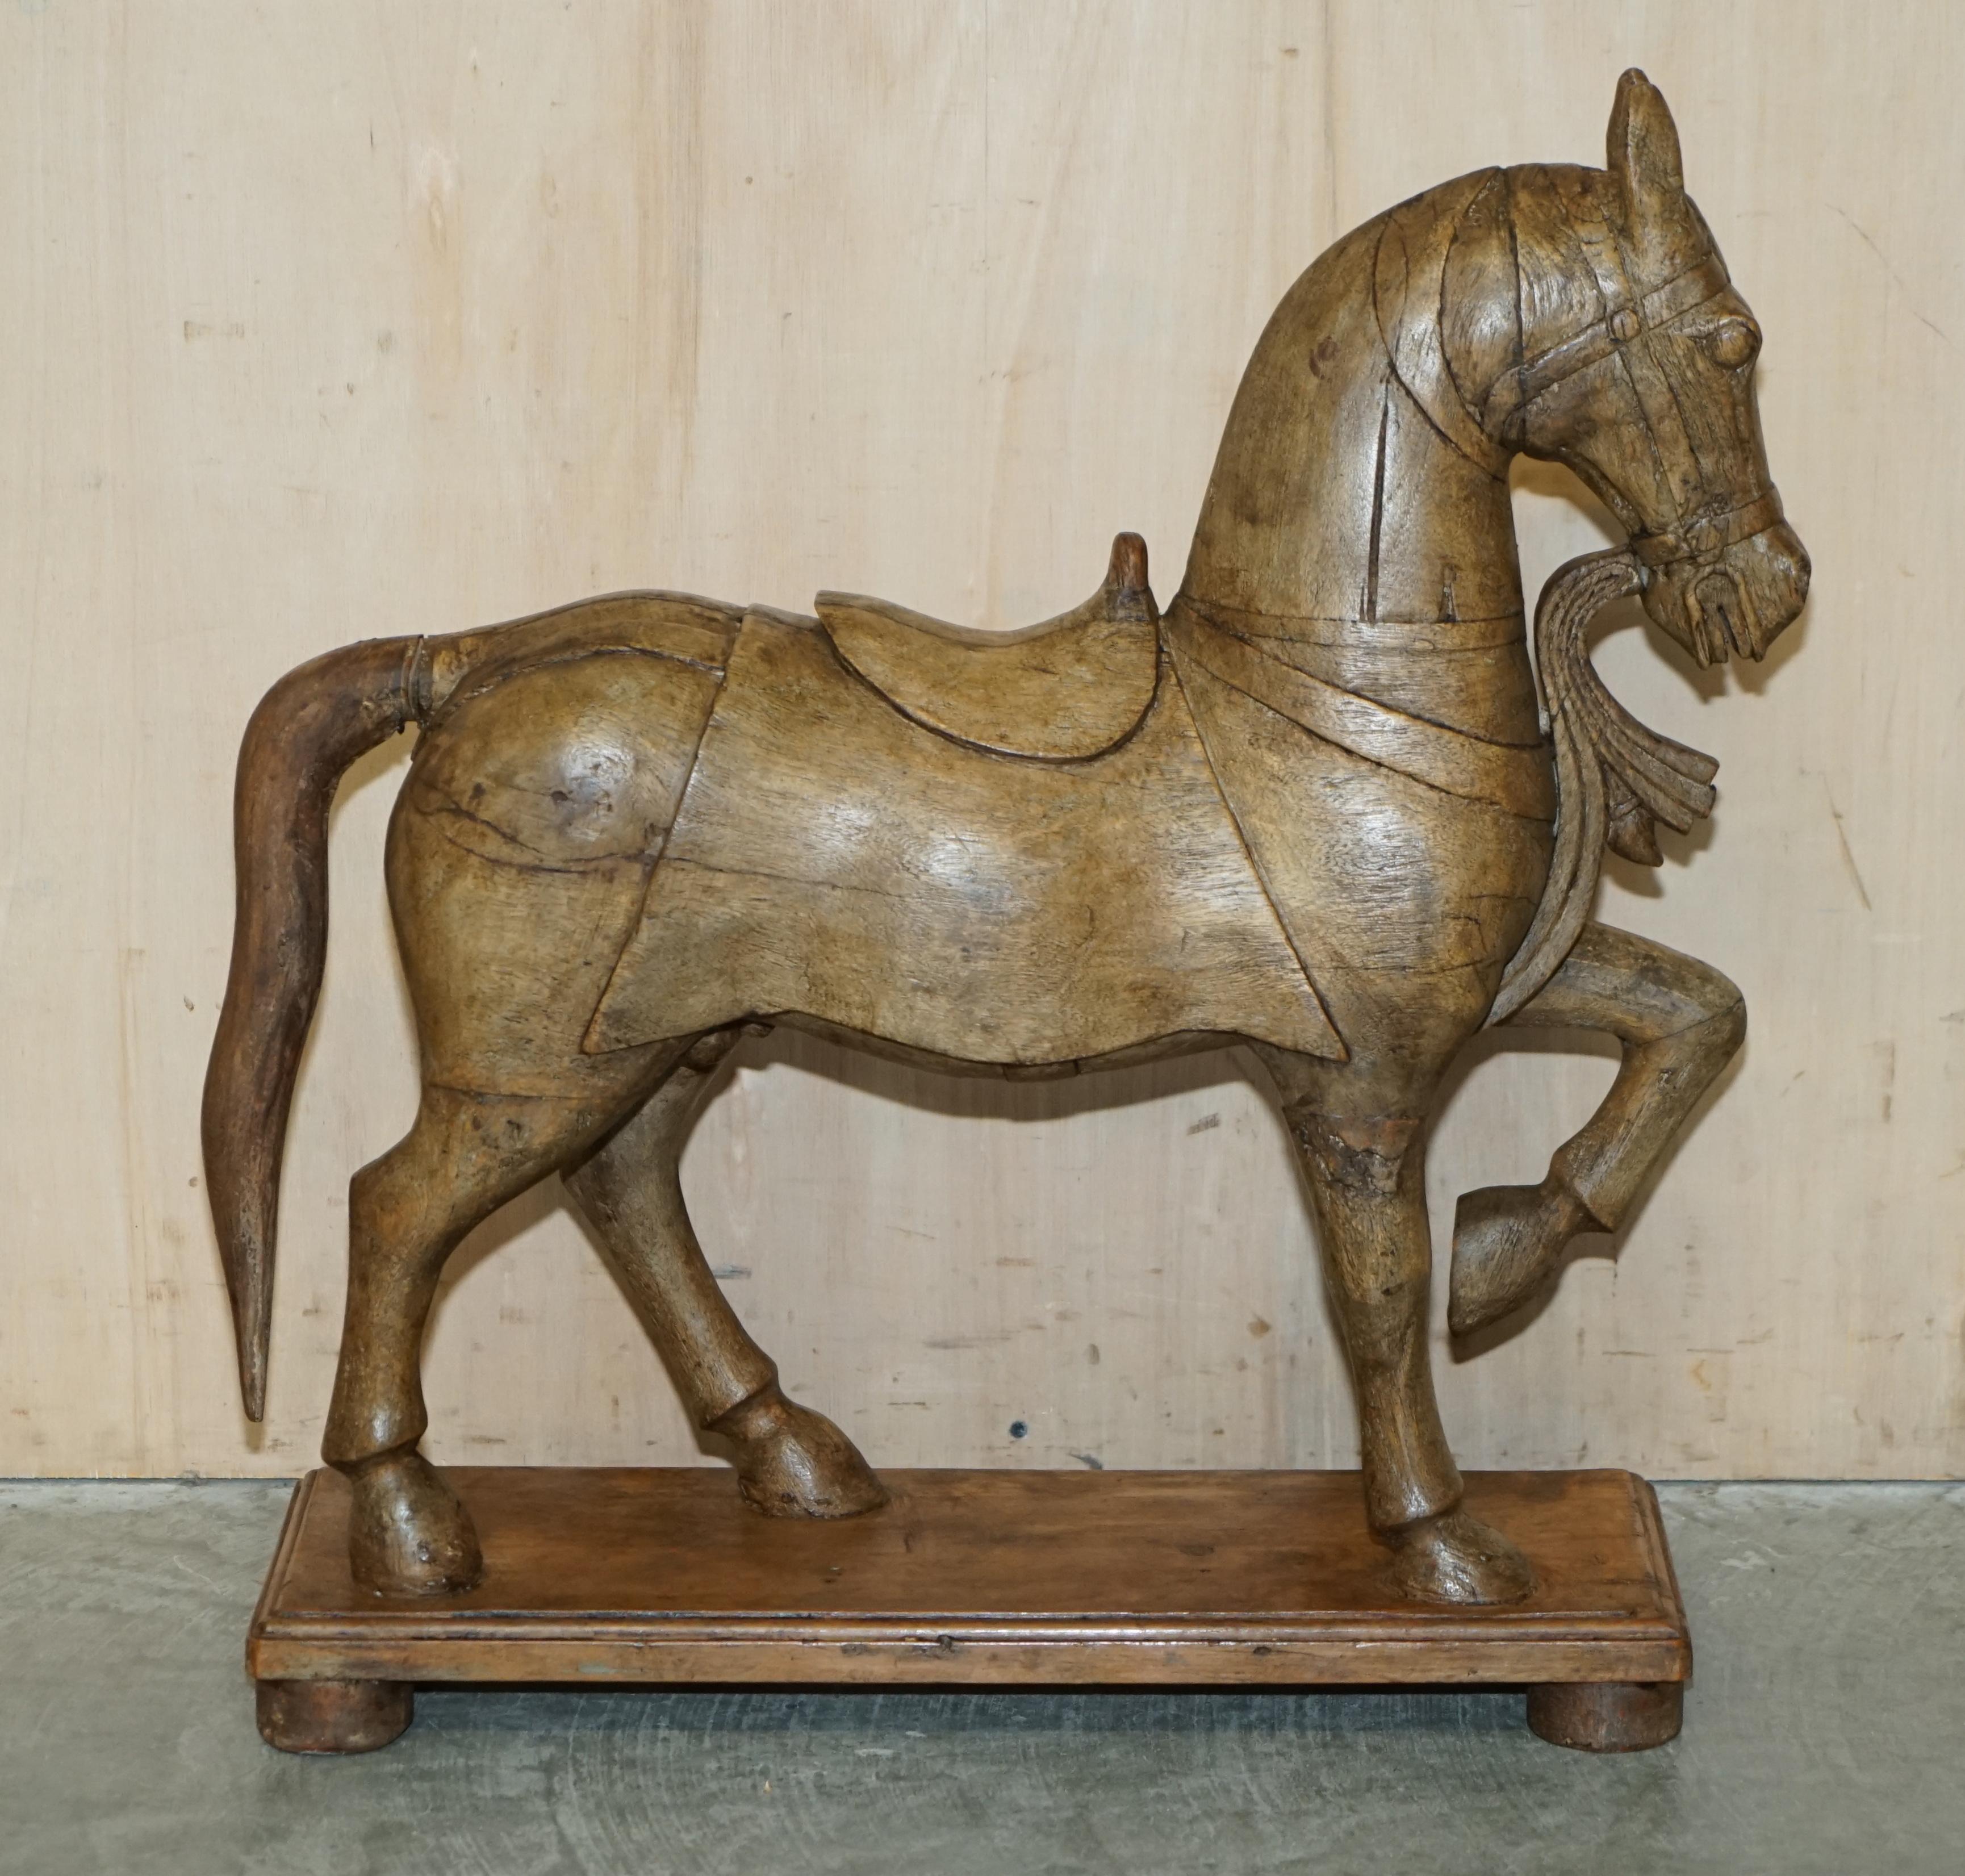 PAiR OF DECORATIVE ANTIQUE HAND CARved WOODEN STATUES OF A LOVELY HORSES im Angebot 13